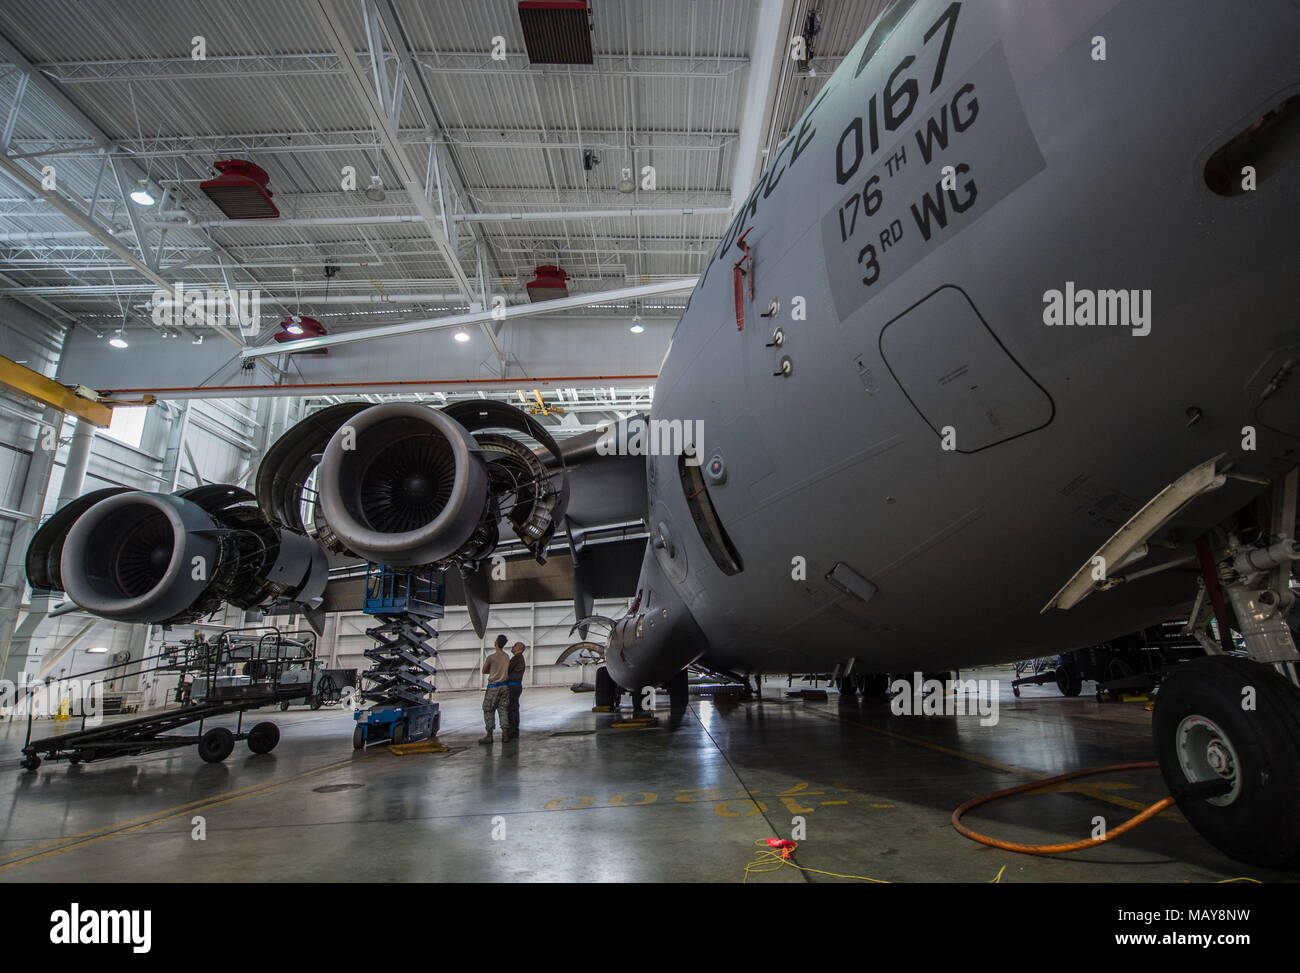 A C-17 Globemaster III assigned to the 176th Wing sits inside a hangar for a home station check at Joint Base Elmendorf-Richardson, Alaska, March 27, 2018. The 3rd and 176th maintenance squadrons complete an in-depth, four-day scheduled inspection of a C-17 approximately every 180 days. A home station check is the behind-the-scenes maintenance that can prevent loss of life, lead to savings in time and money and keep the aircraft fit to fight. (U.S. Air Force photo by Senior Airman Curt Beach) Stock Photo